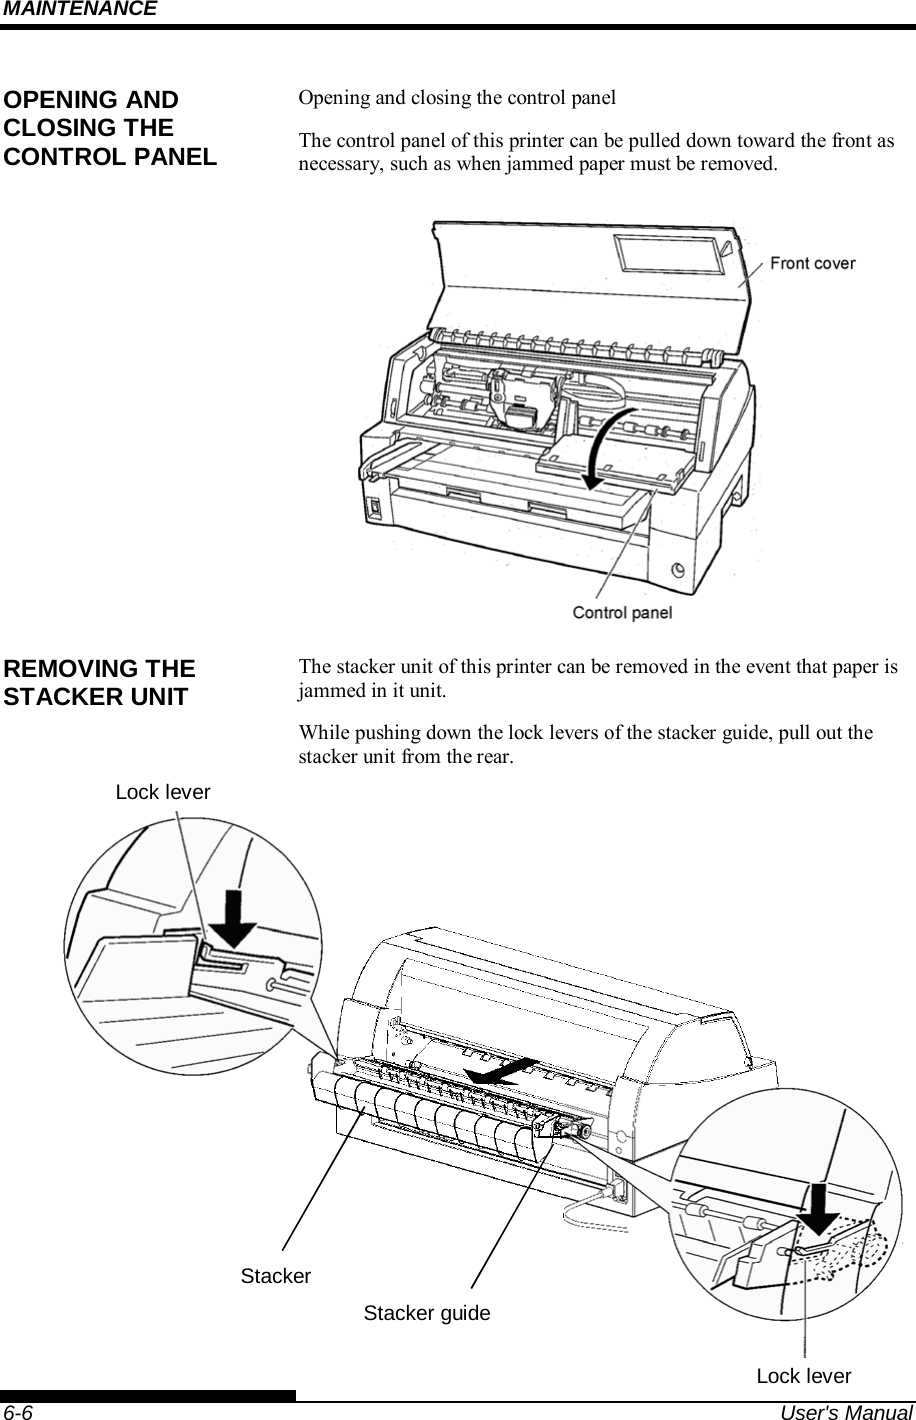 MAINTENANCE    6-6  User&apos;s Manual Opening and closing the control panel The control panel of this printer can be pulled down toward the front as necessary, such as when jammed paper must be removed.  The stacker unit of this printer can be removed in the event that paper is jammed in it unit. While pushing down the lock levers of the stacker guide, pull out the stacker unit from the rear.     OPENING AND CLOSING THE CONTROL PANEL REMOVING THE STACKER UNIT Lock lever Stacker guideLock lever Stacker 